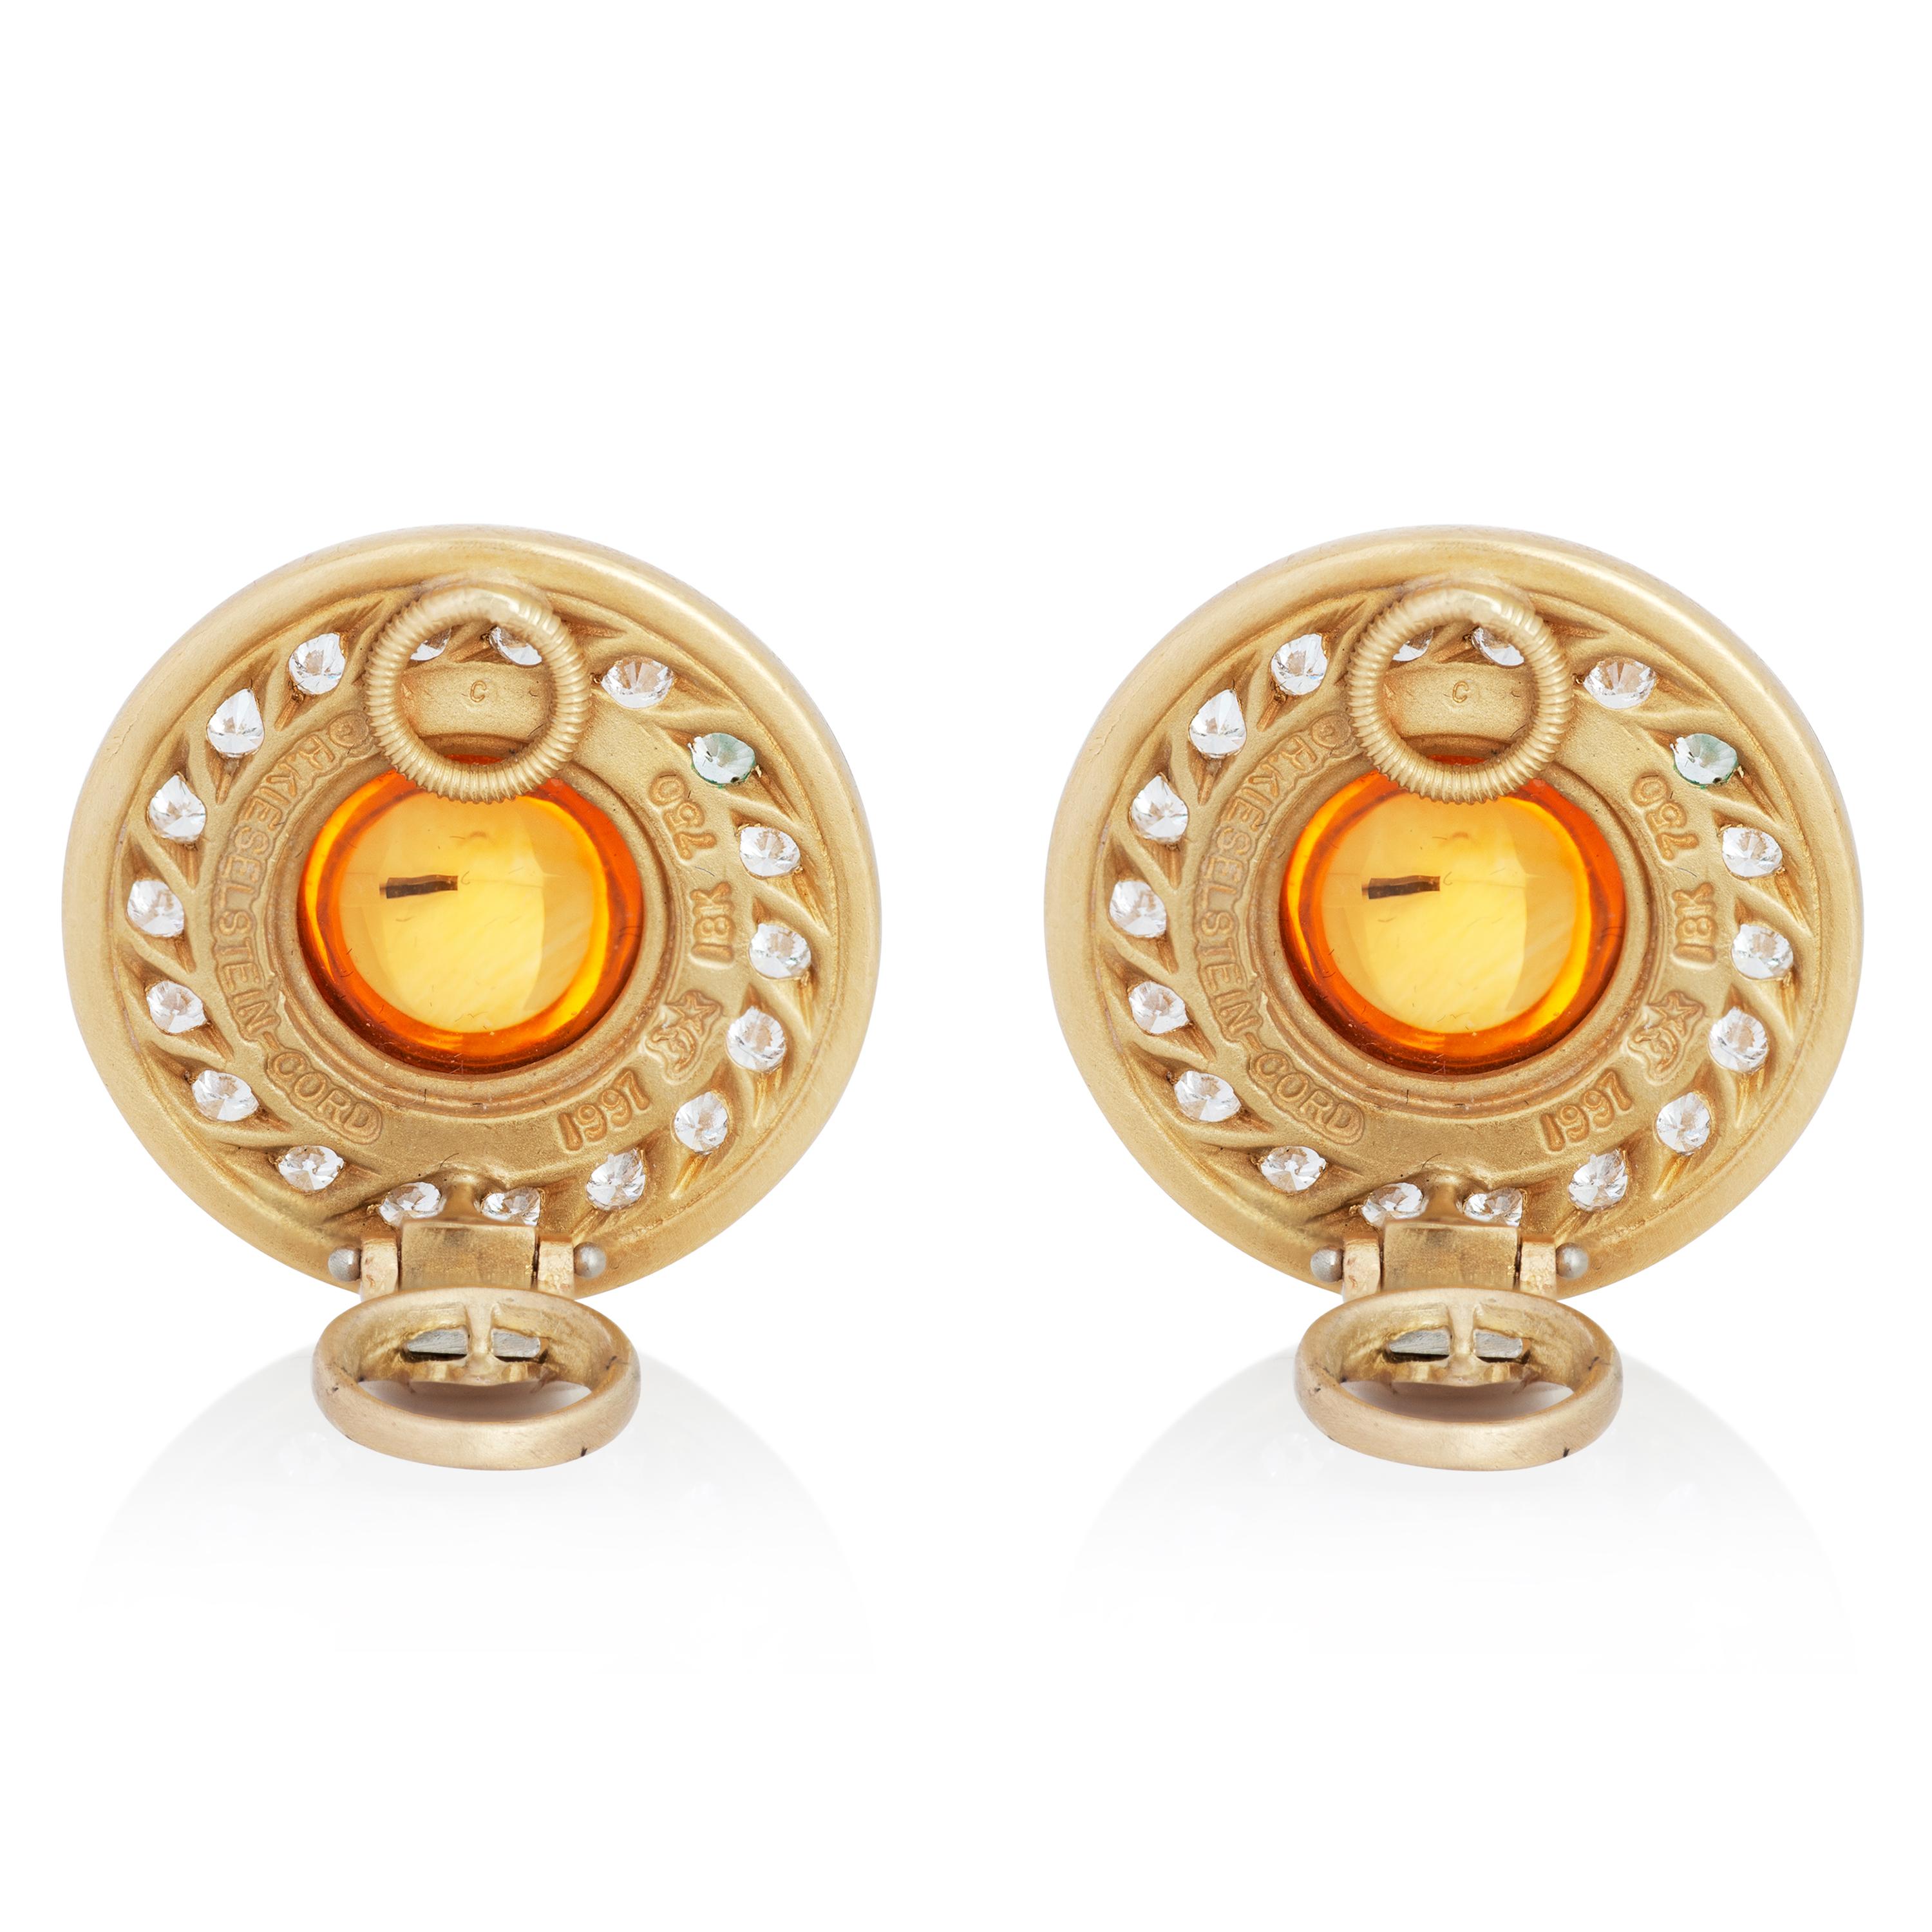 Barry Kieselstein-Cord Cabochon Citrine and Diamond Ear Clips in 18k Yellow Gold In Good Condition For Sale In Philadelphia, PA